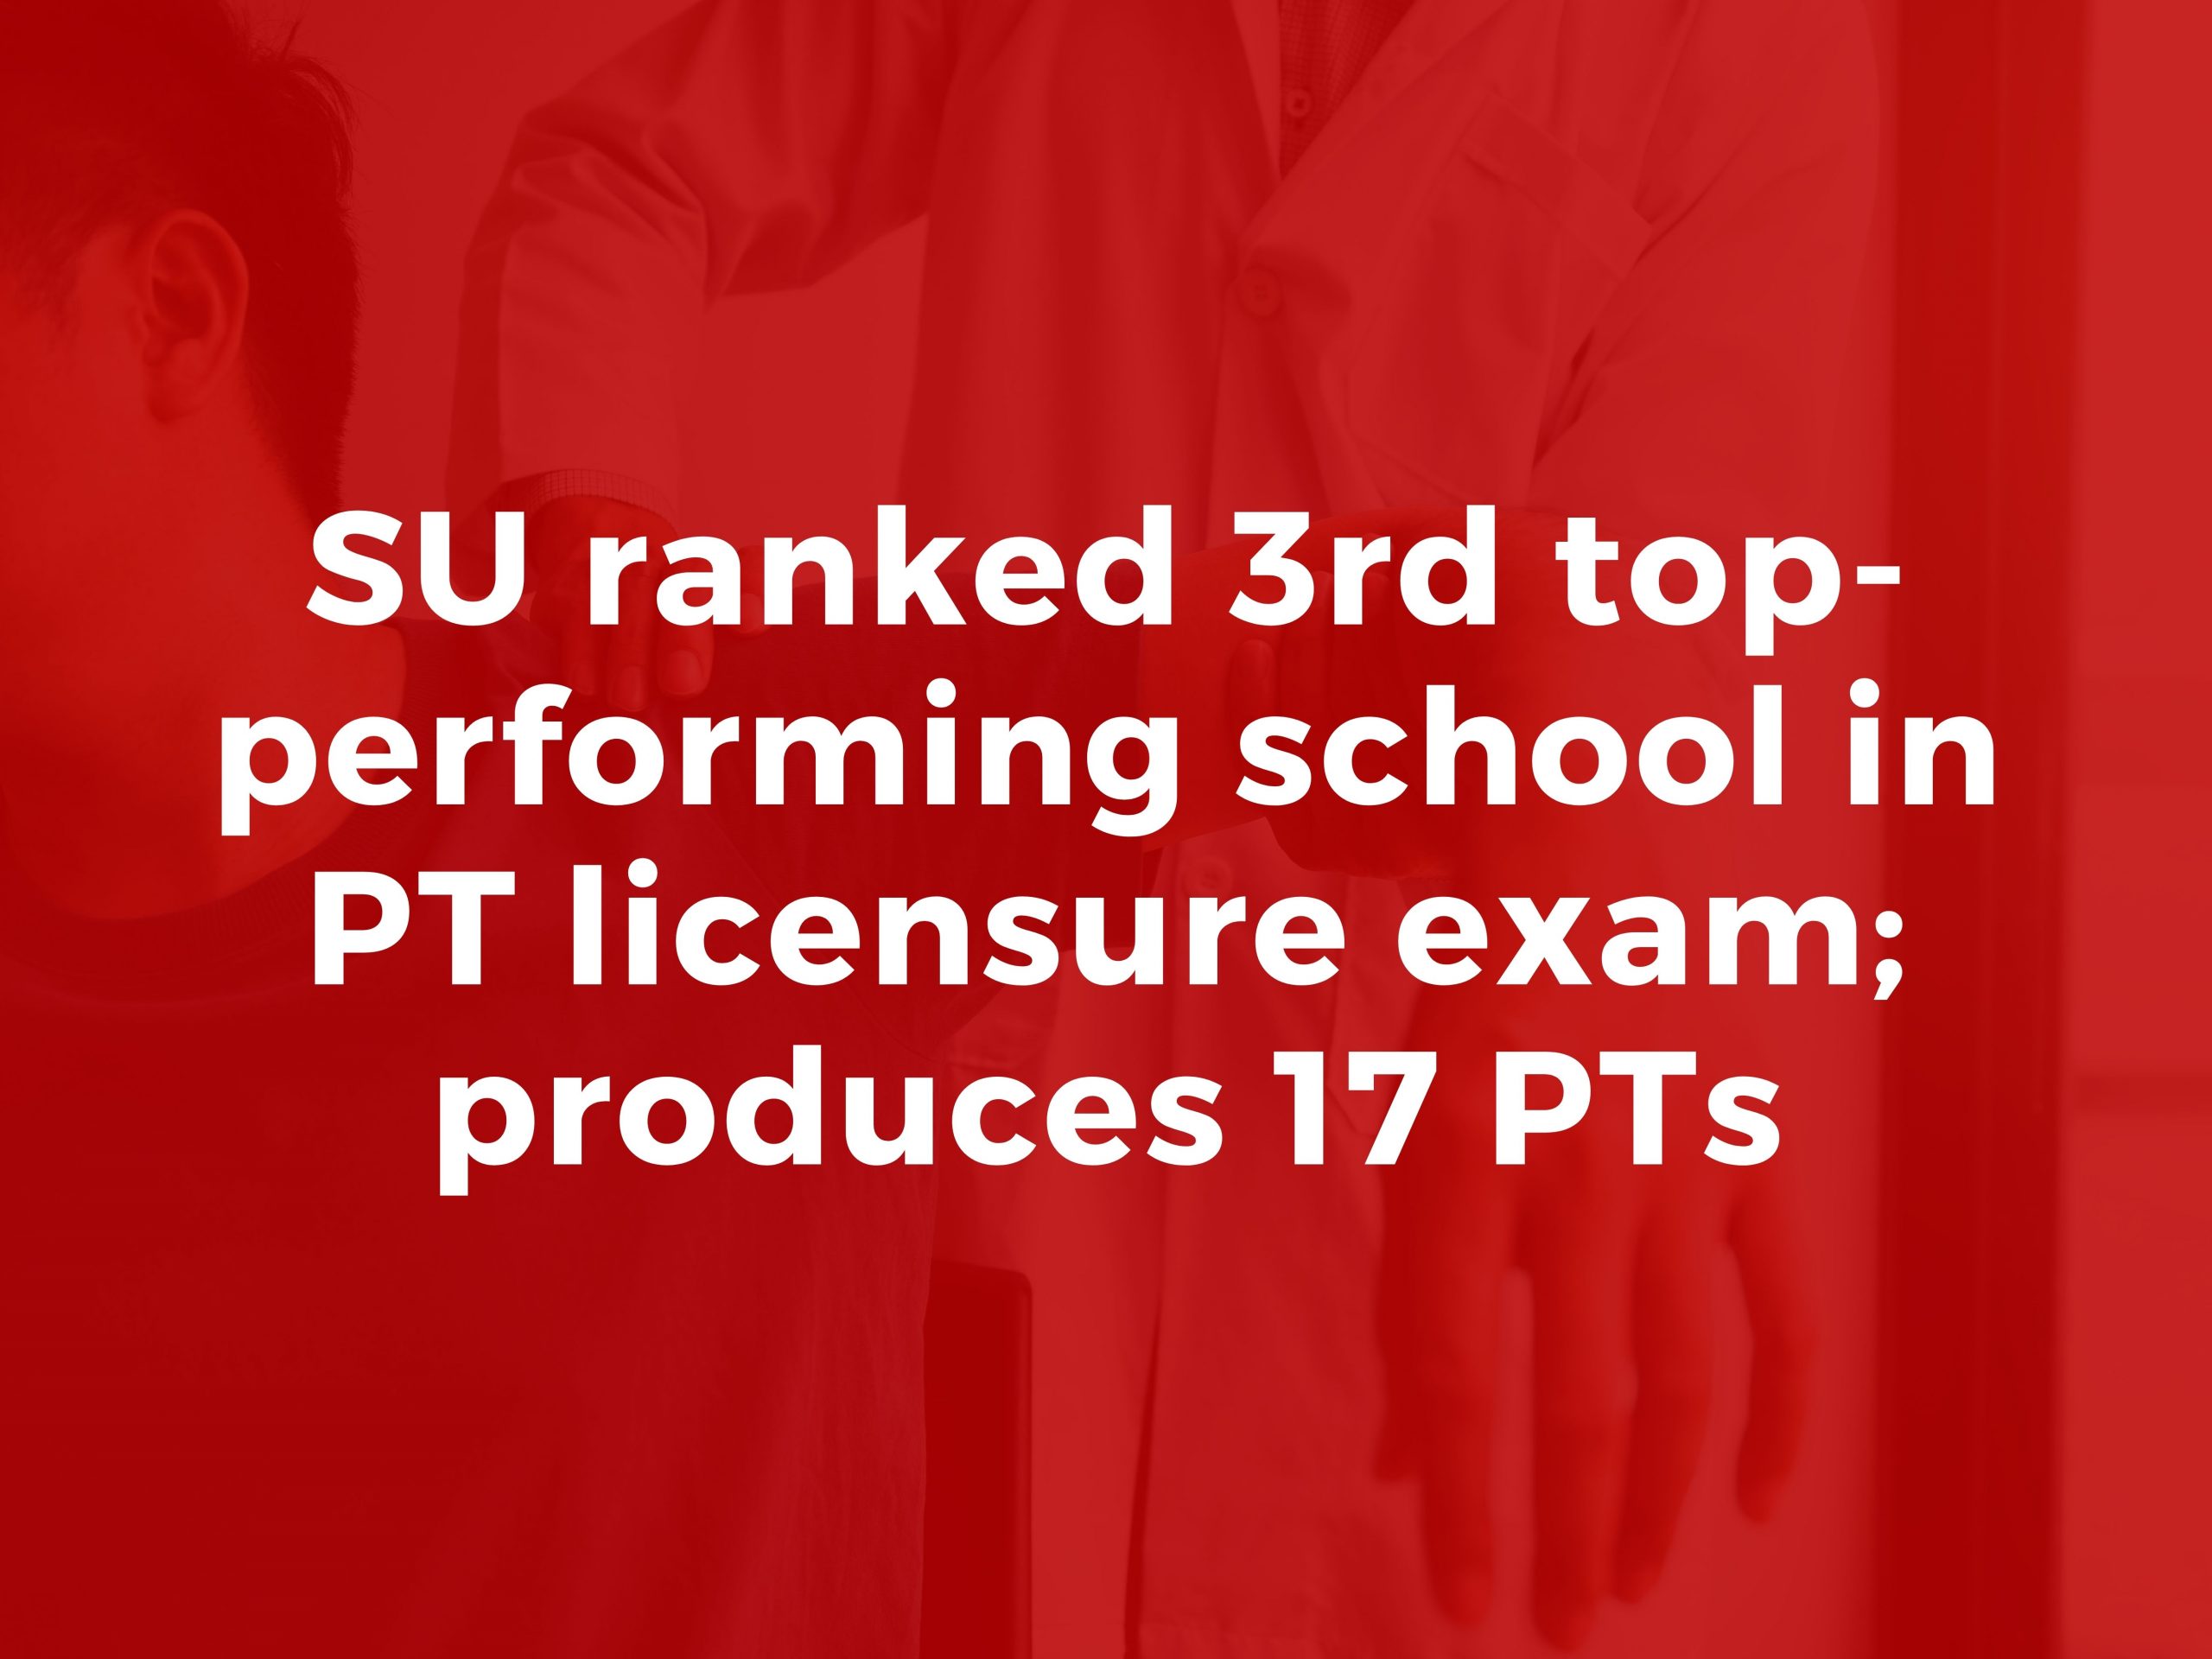 SU ranked 3rd top-performing school in PT licensure exam; produces 17 PTs